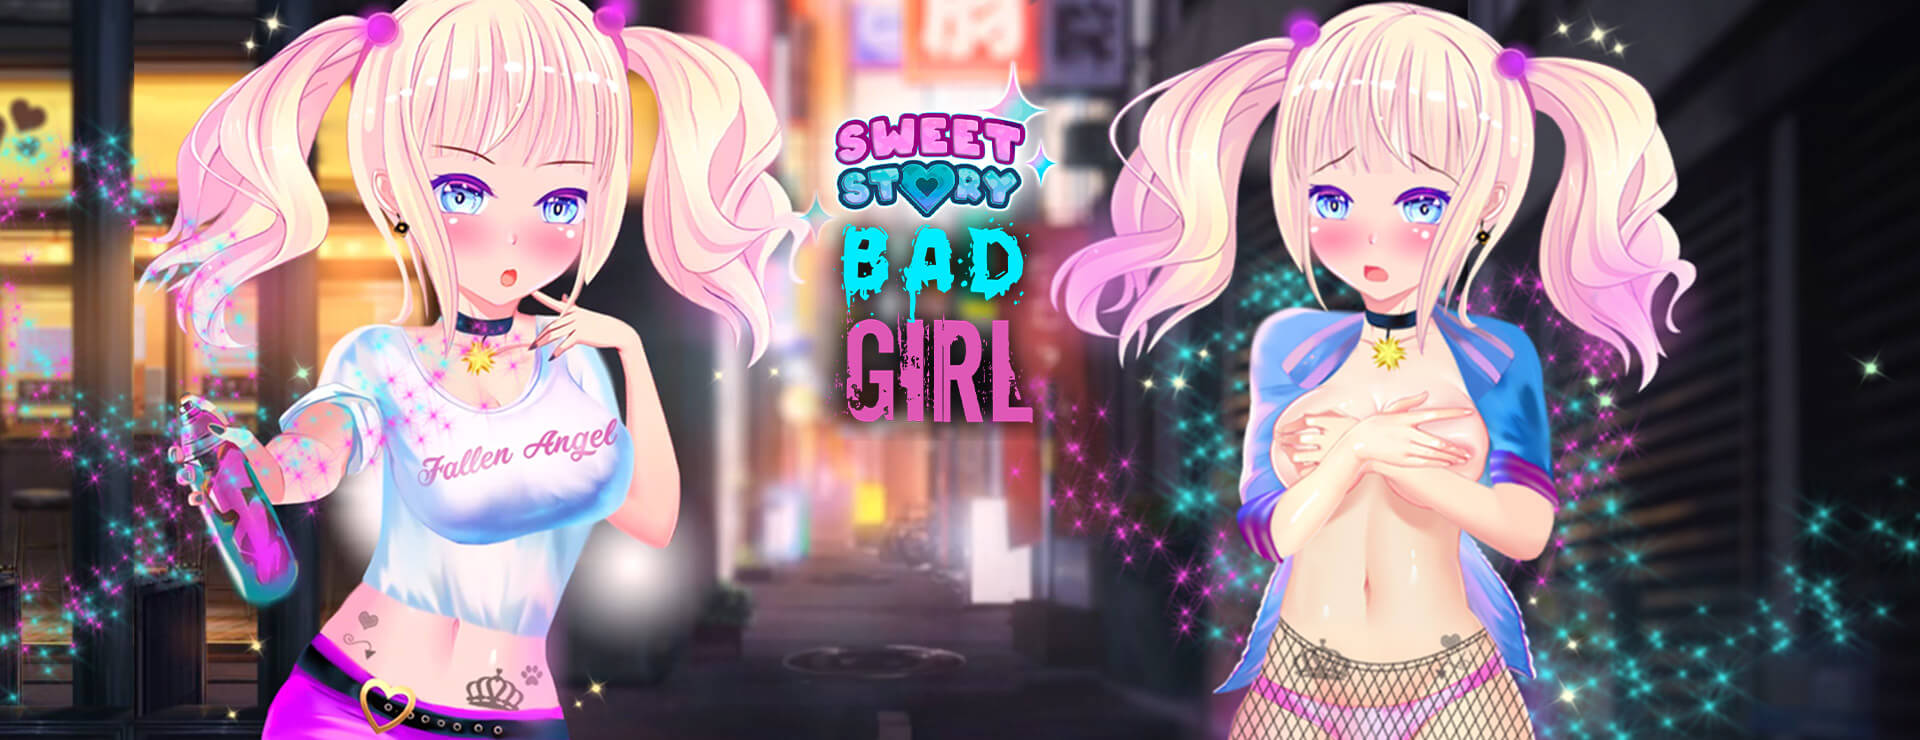 Sweet Story Bad Girl - Casual Game